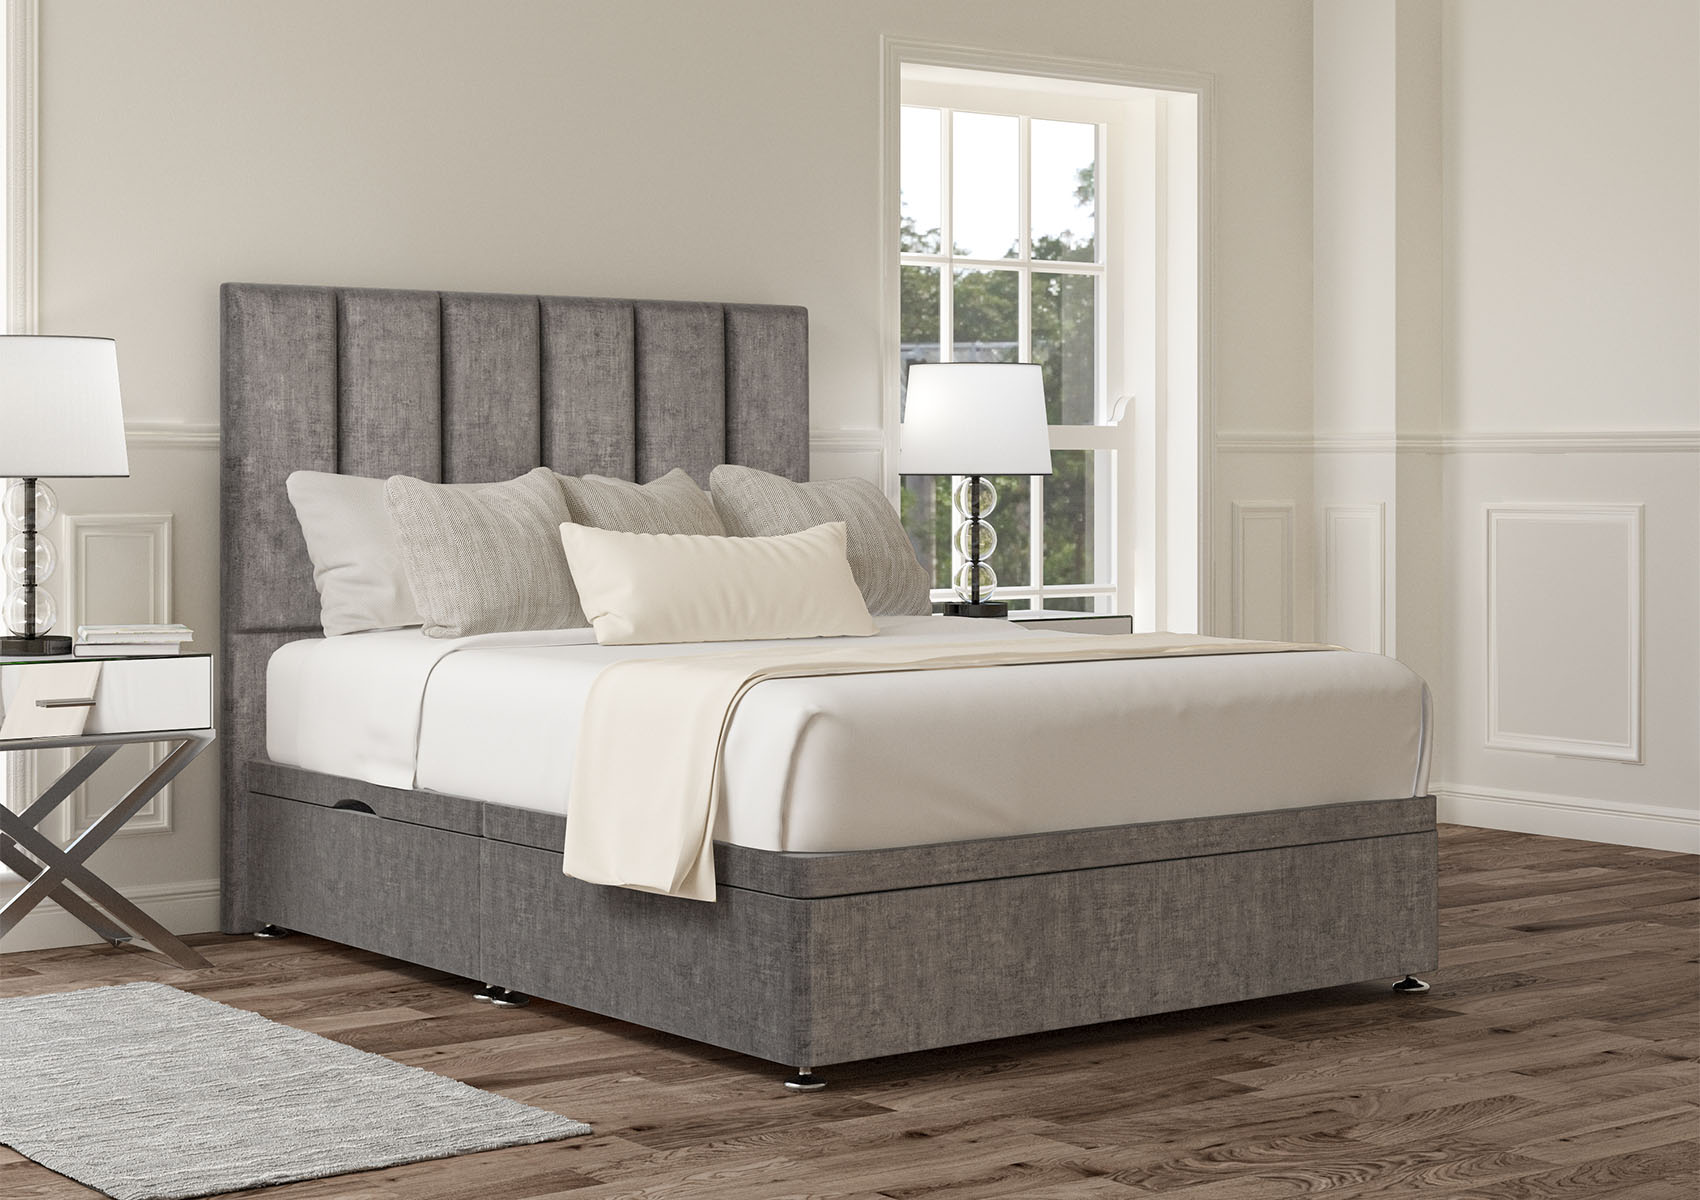 View Empire Heritage Steel Upholstered King Size Ottoman Bed Time4Sleep information